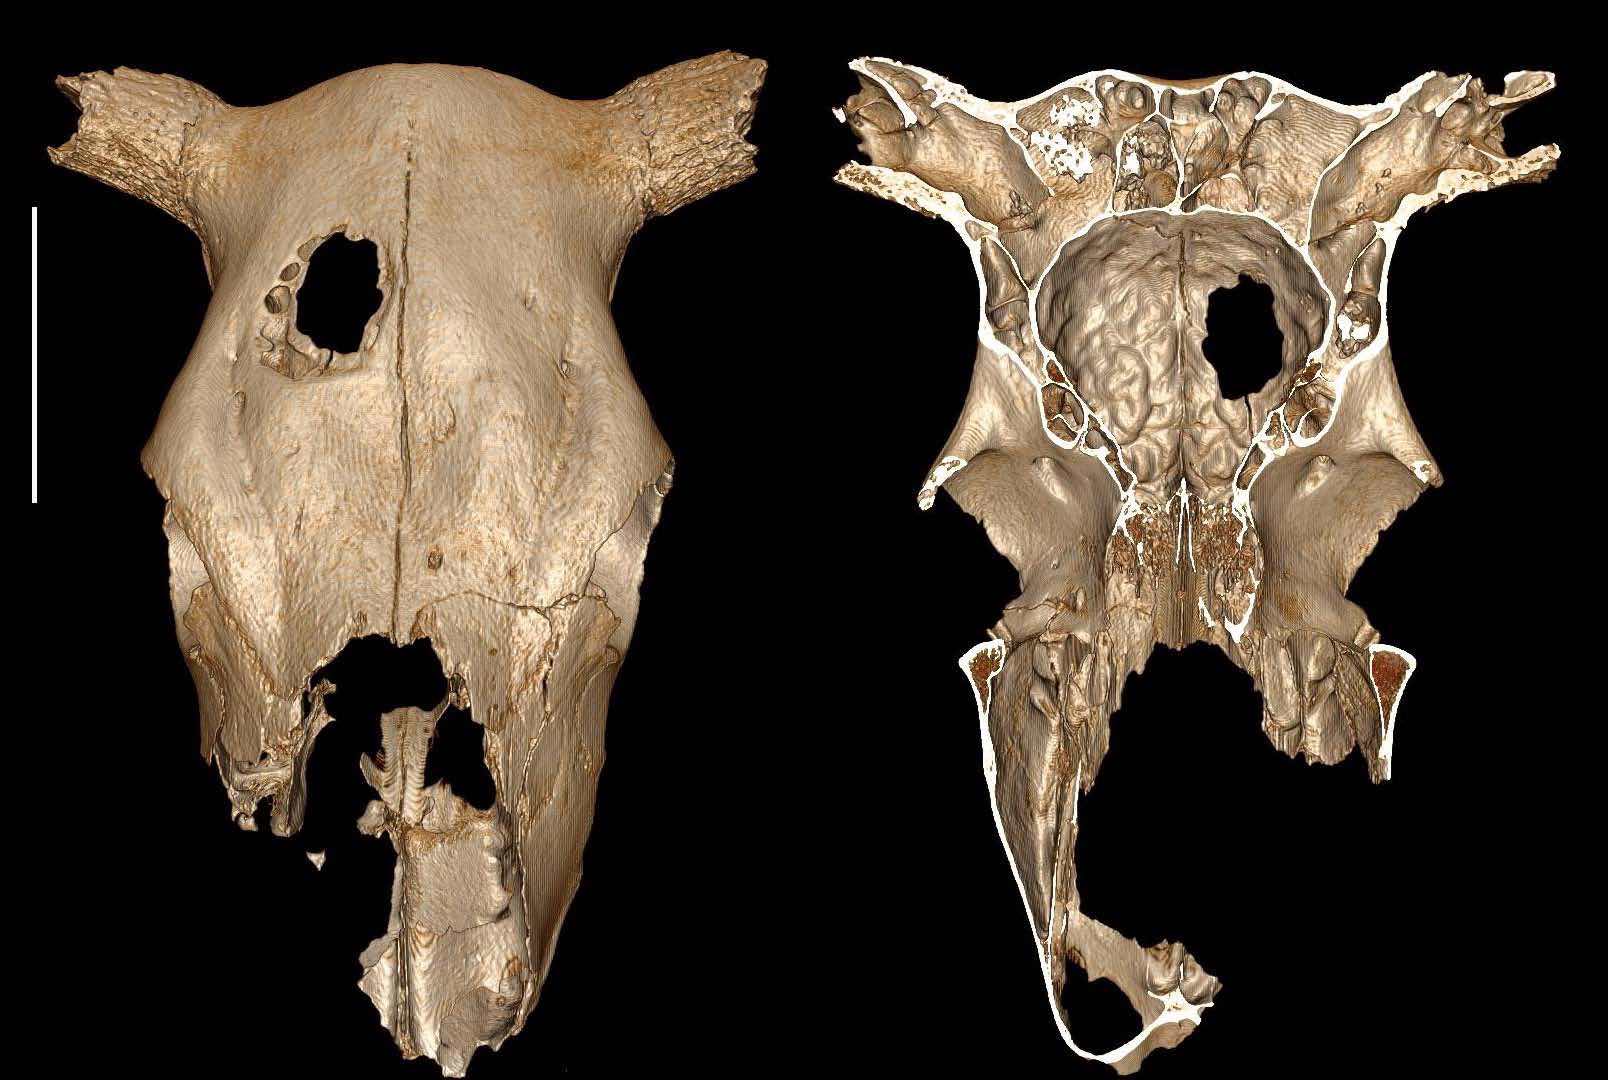 Hole in cow's skull Bears Evidence Of Early Cranial Surgery